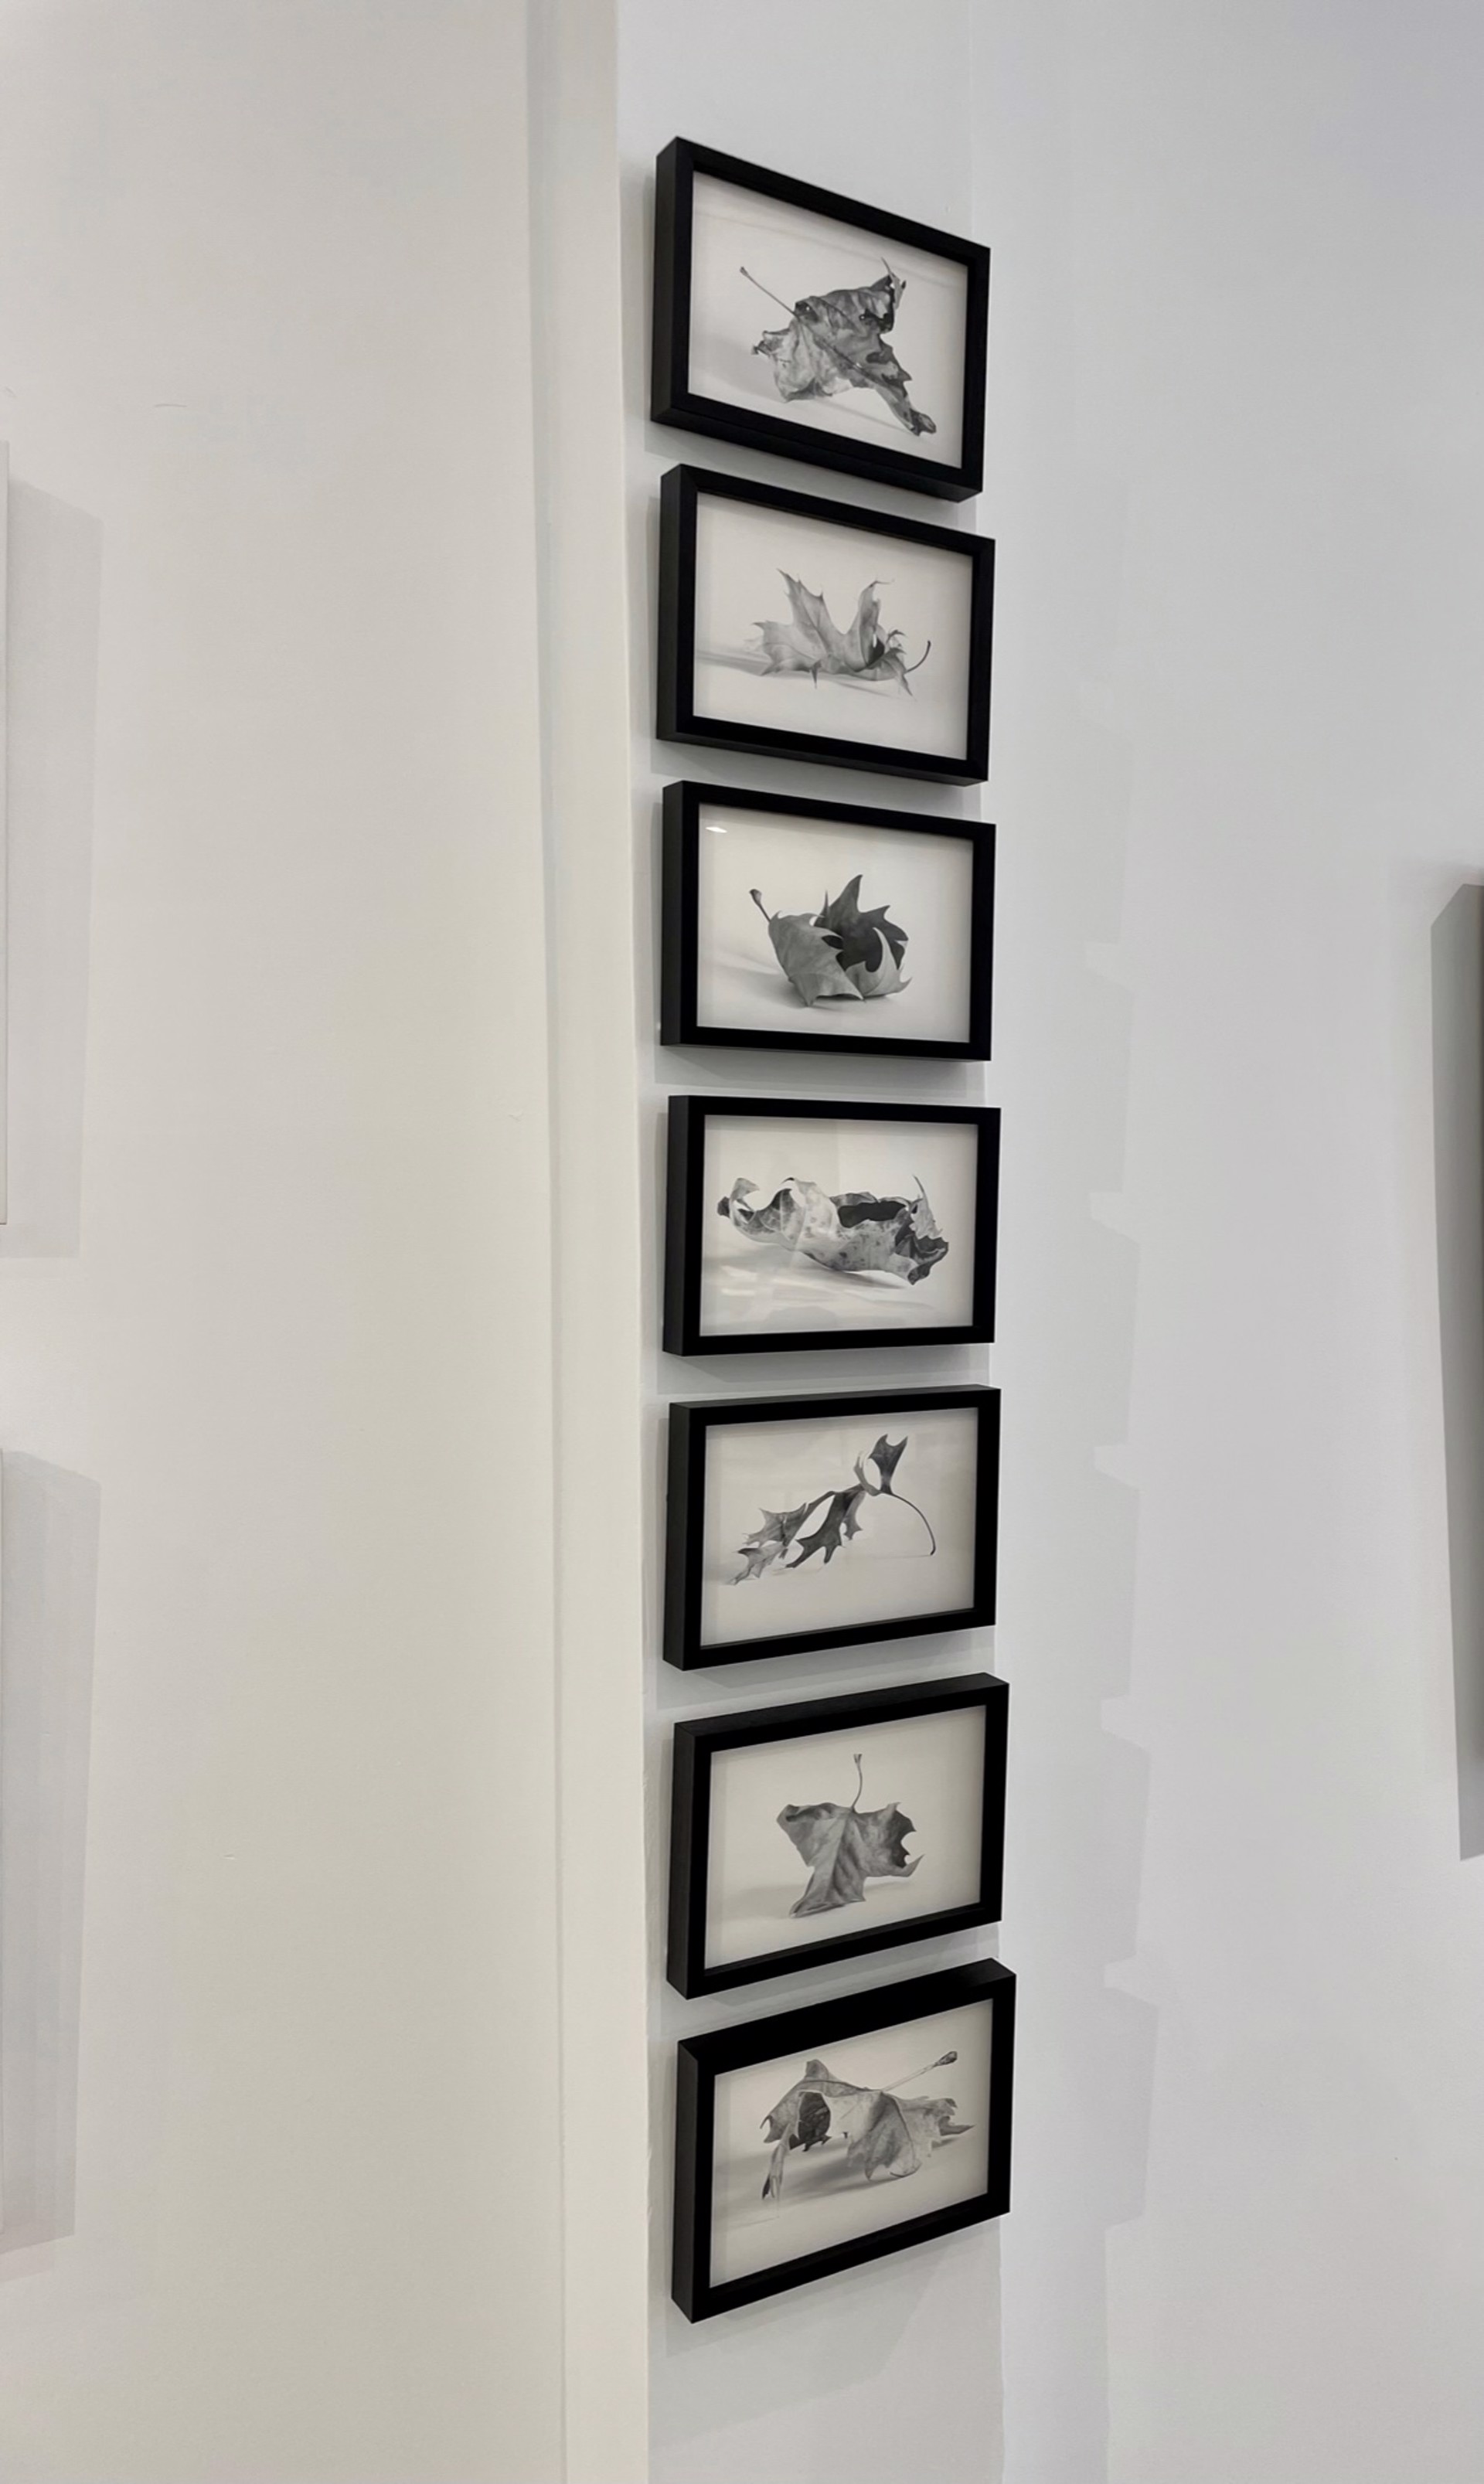 Every Leaf series (set of 7 framed photographic prints) by Alyson Belcher